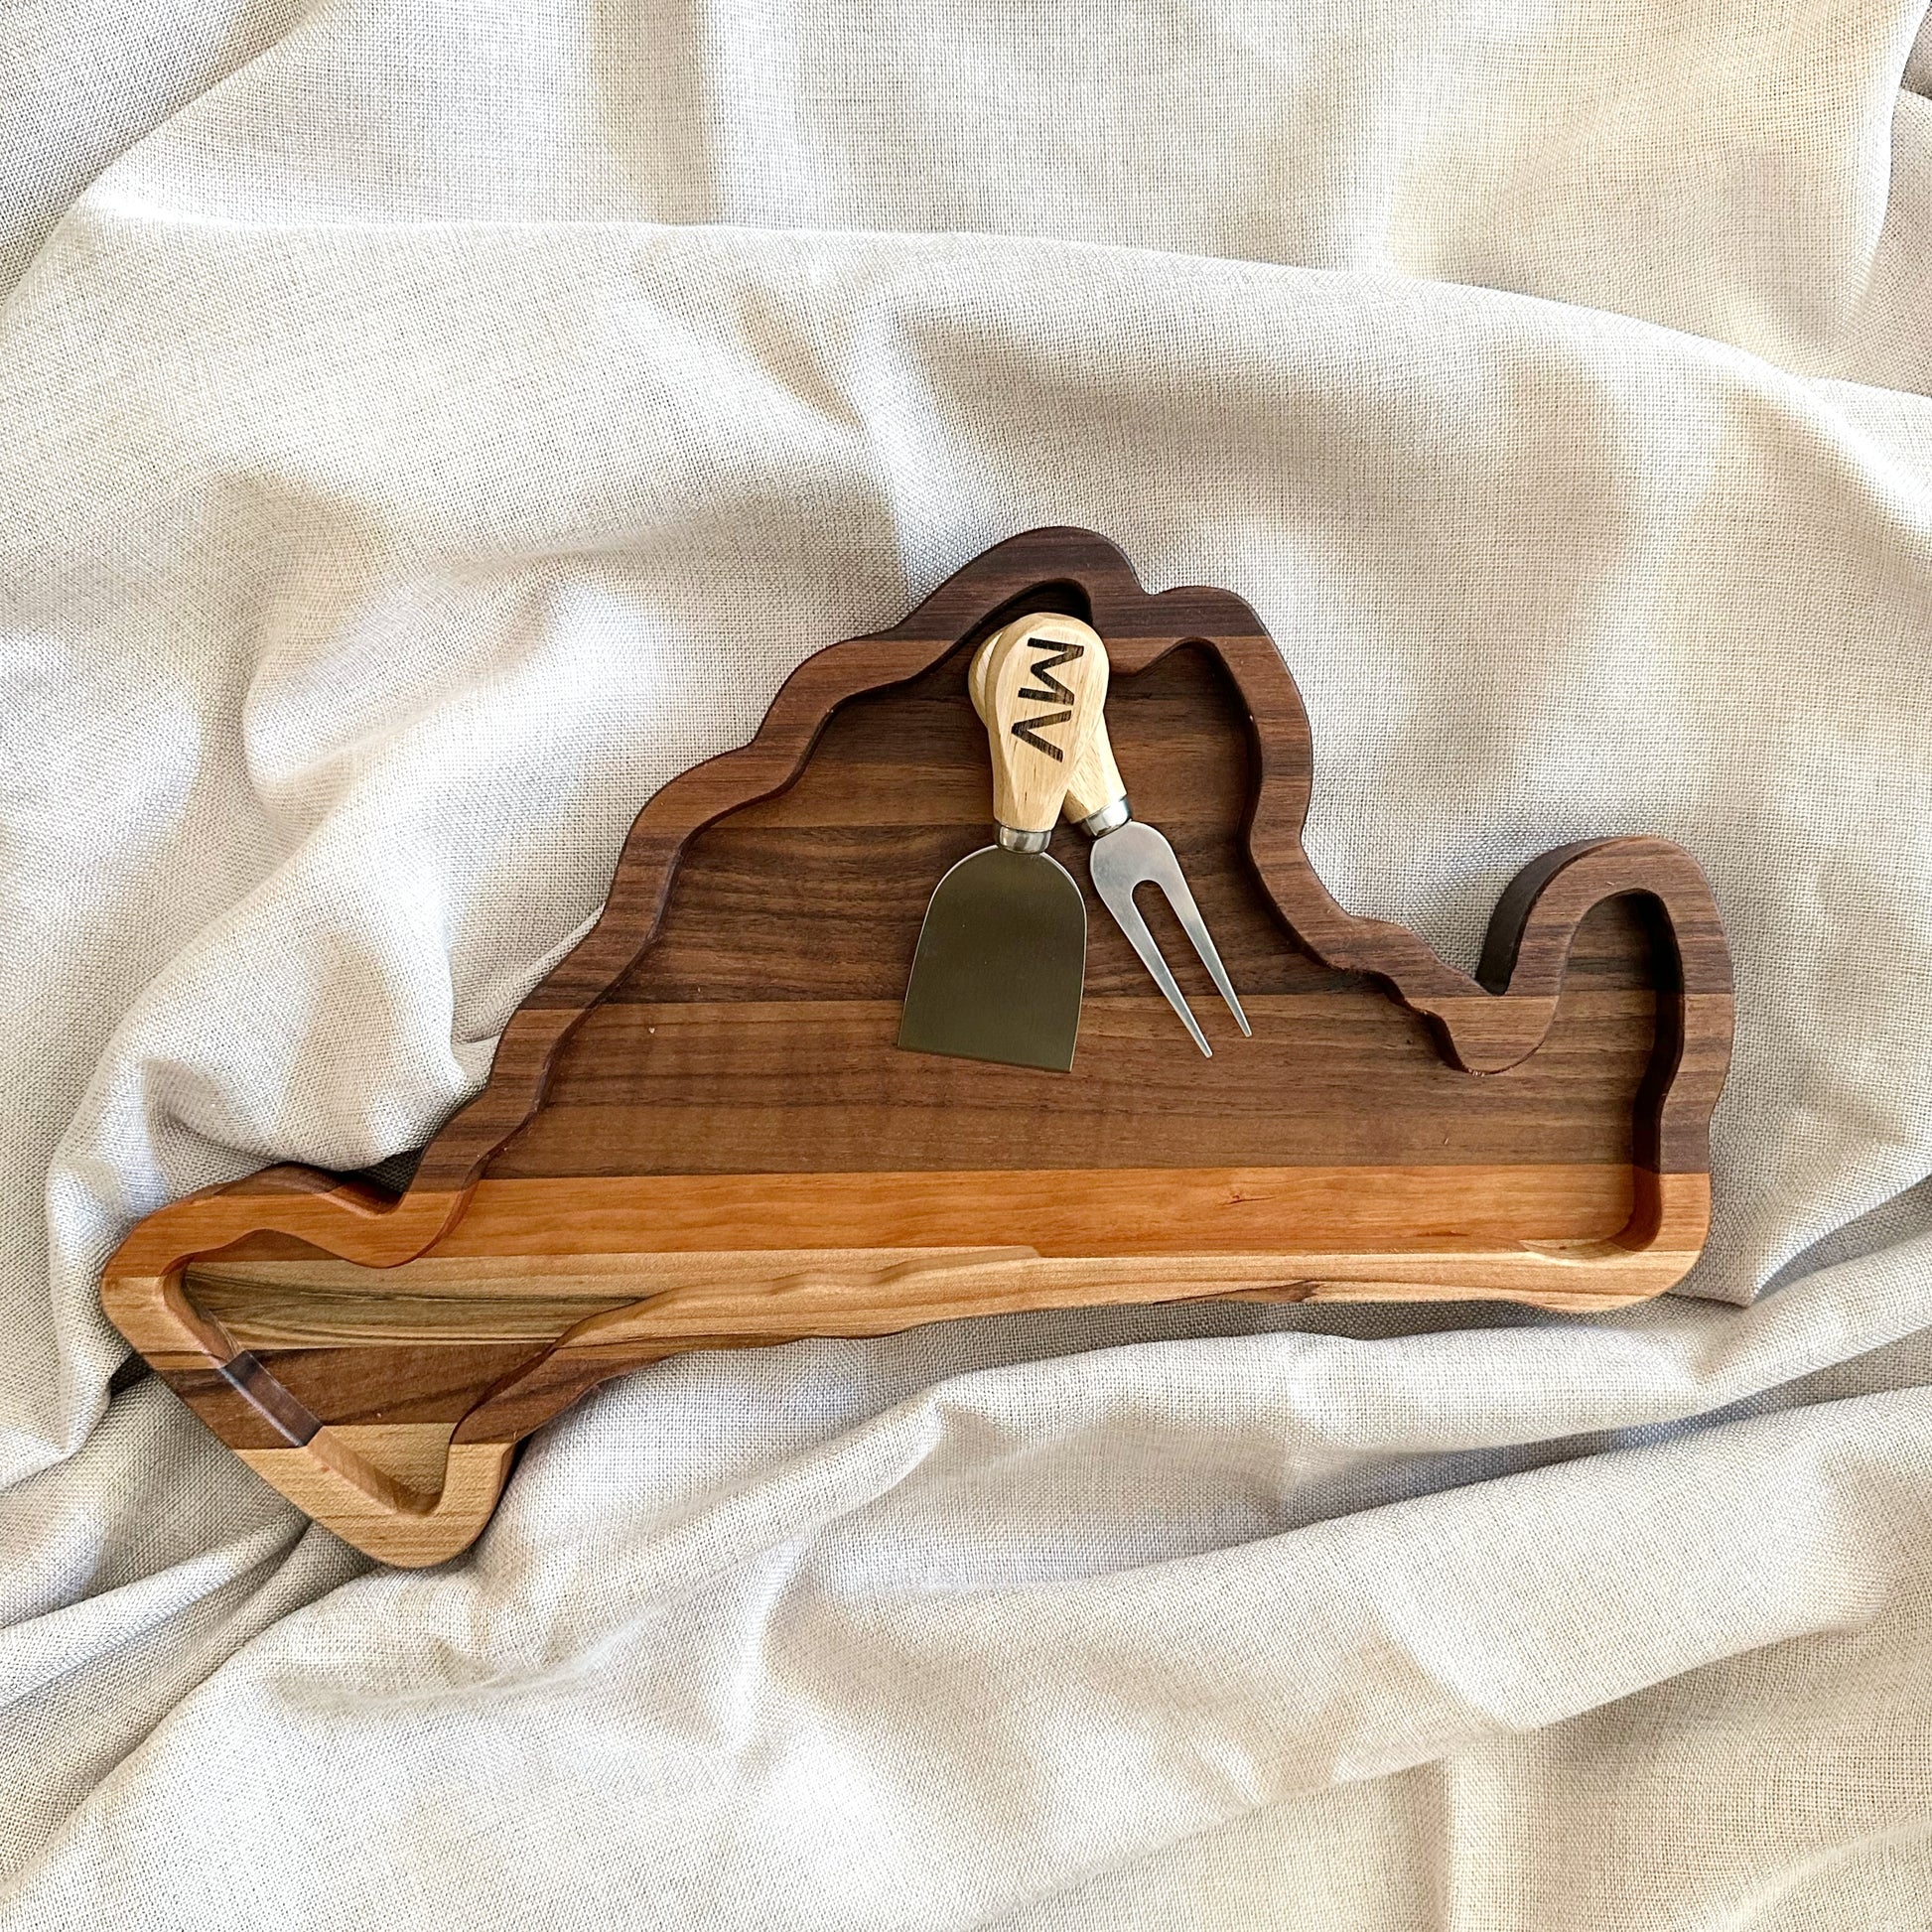 Martha's Vineyard-shaped charcuterie board with engraved cheese knife set